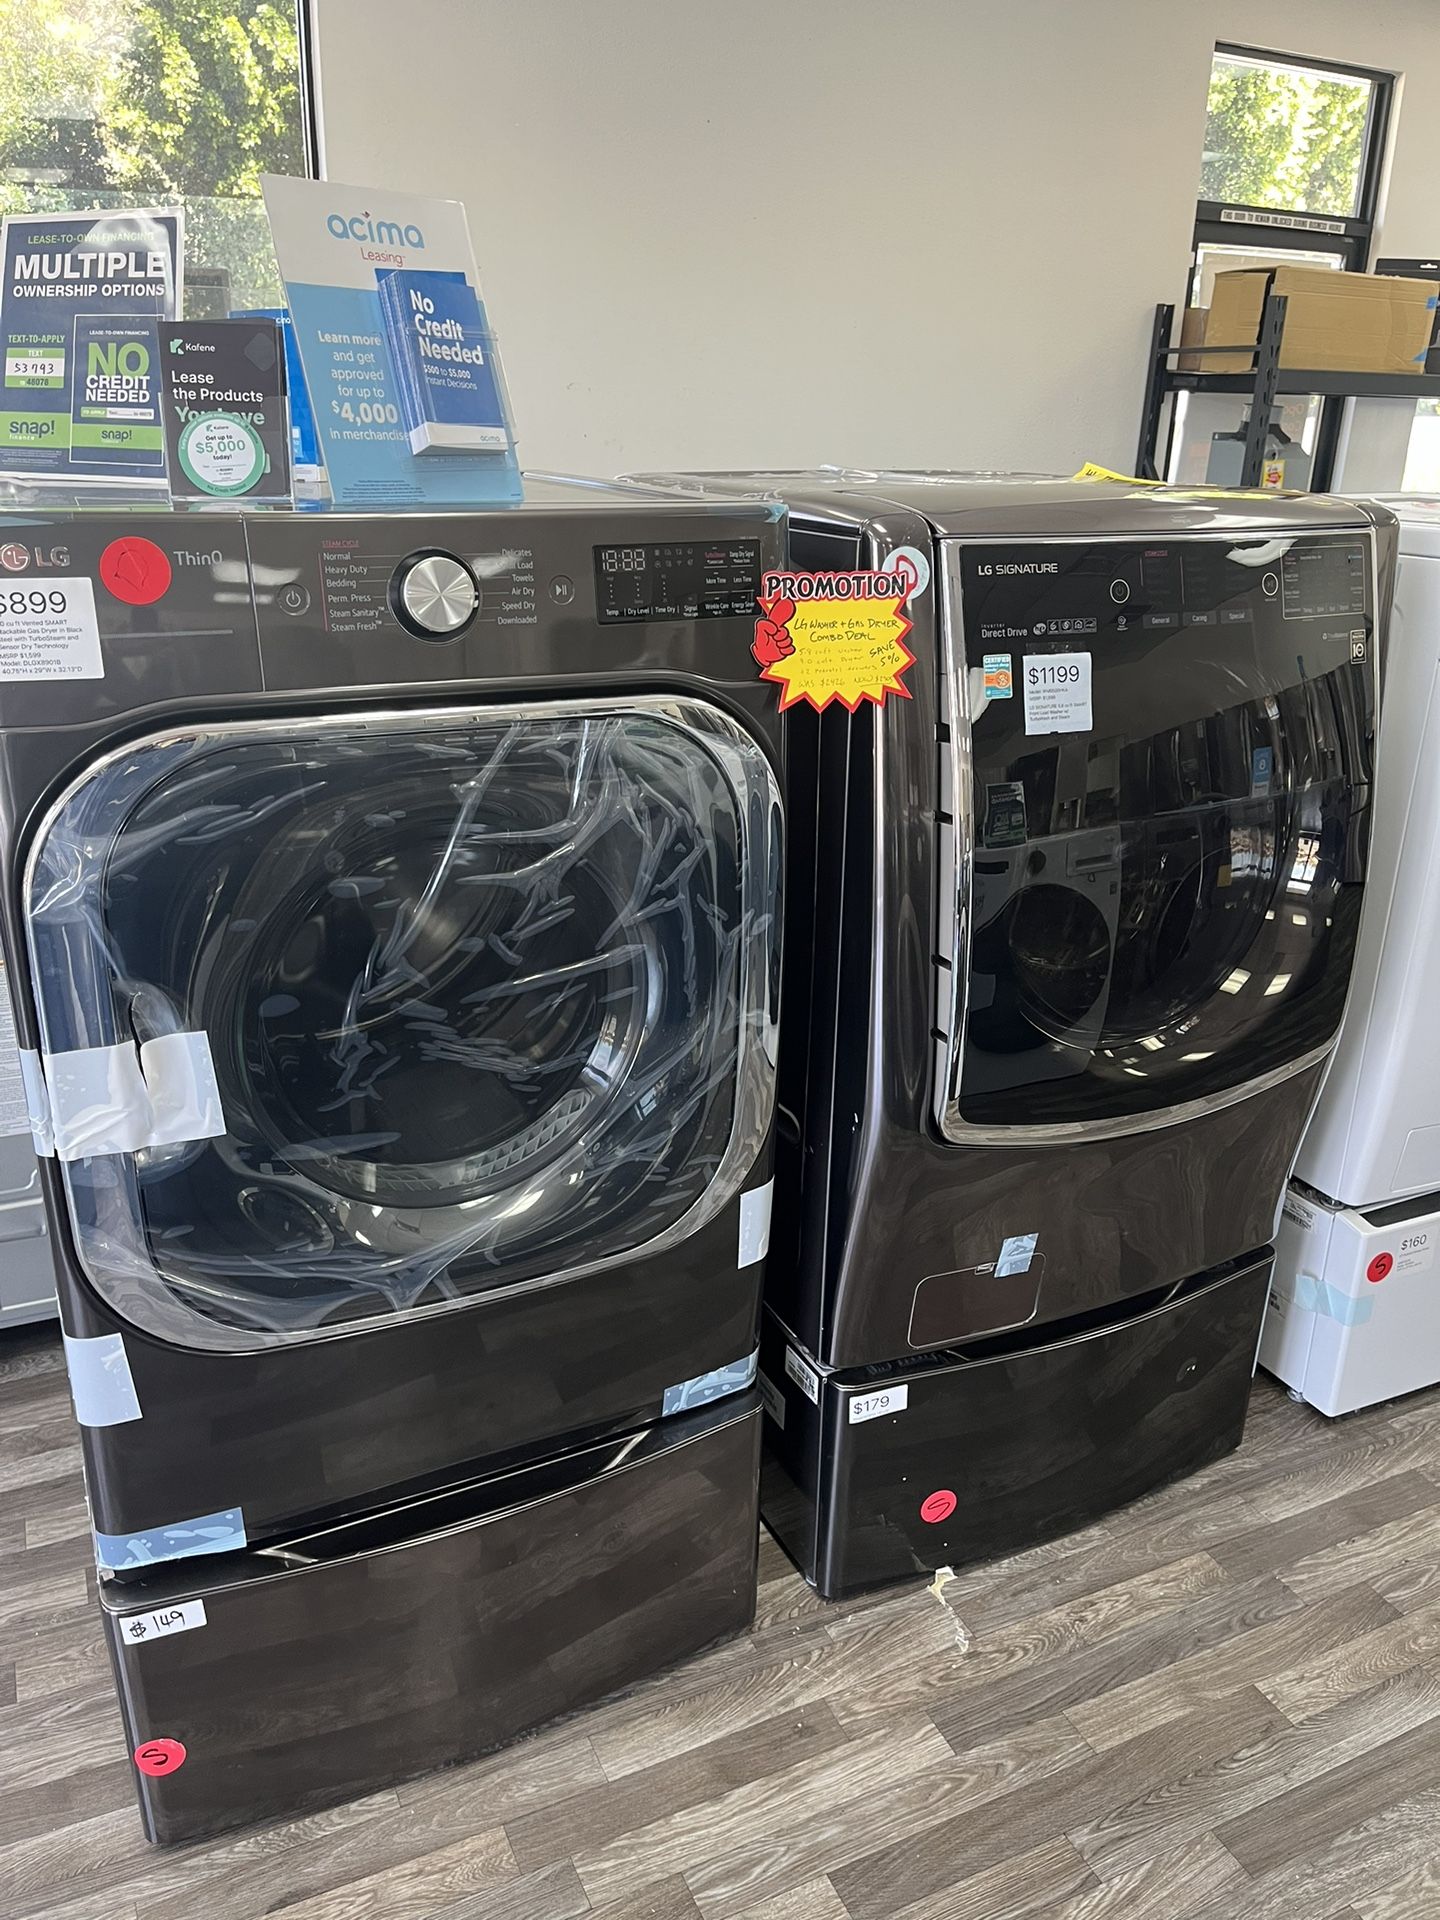 LG Washer / Gas Dryer / 2 Pedestal Bases Combo Deal (NOW ONLY $2305)